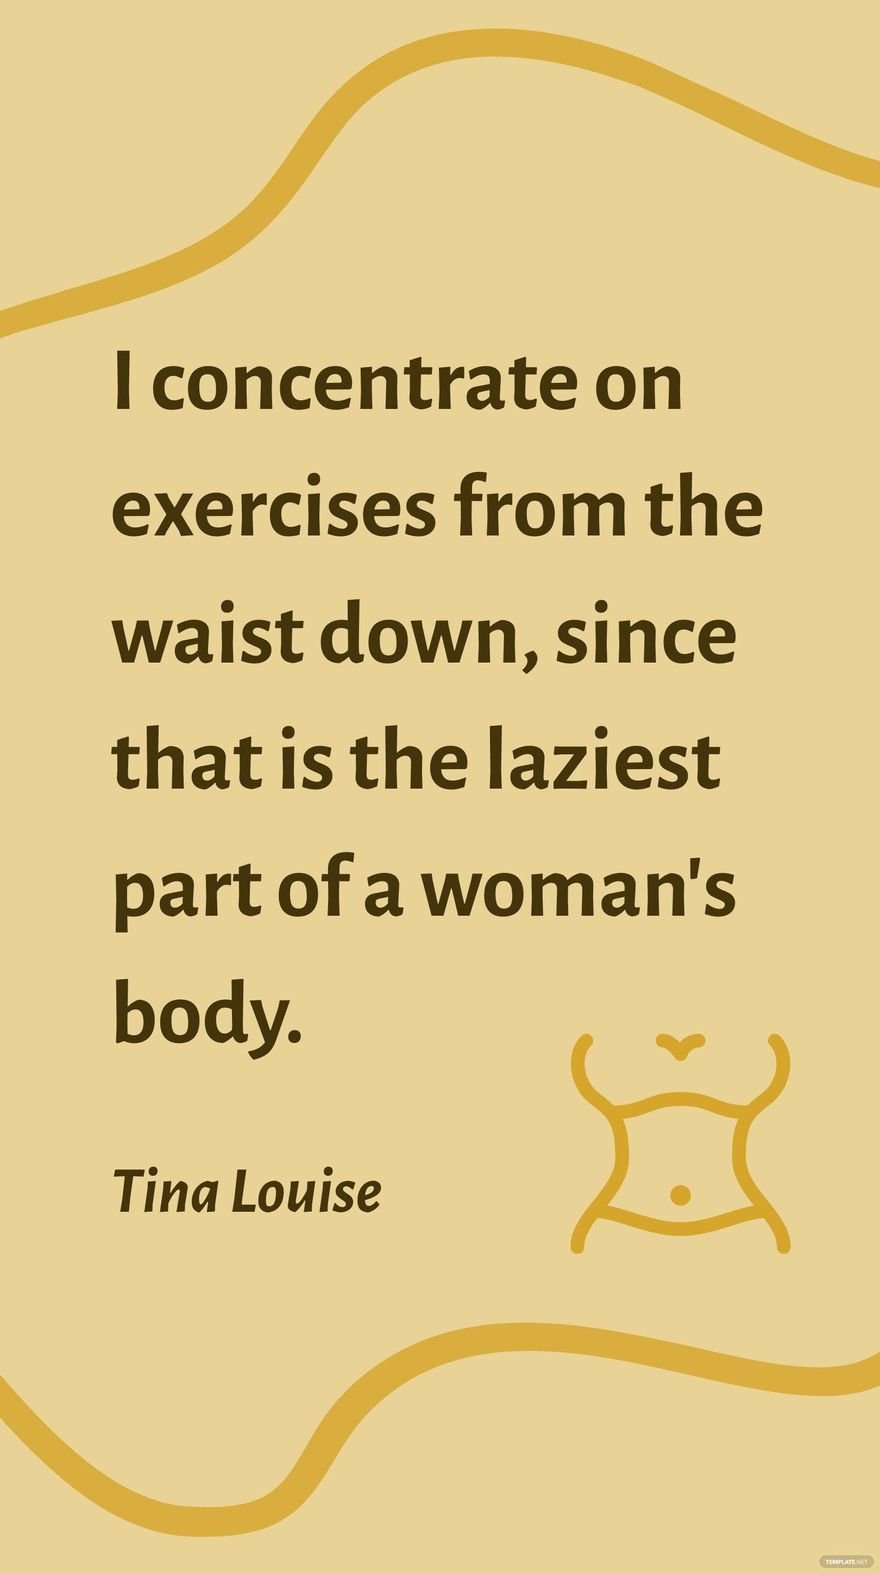 Free Tina Louise - I concentrate on exercises from the waist down, since that is the laziest part of a woman's body.